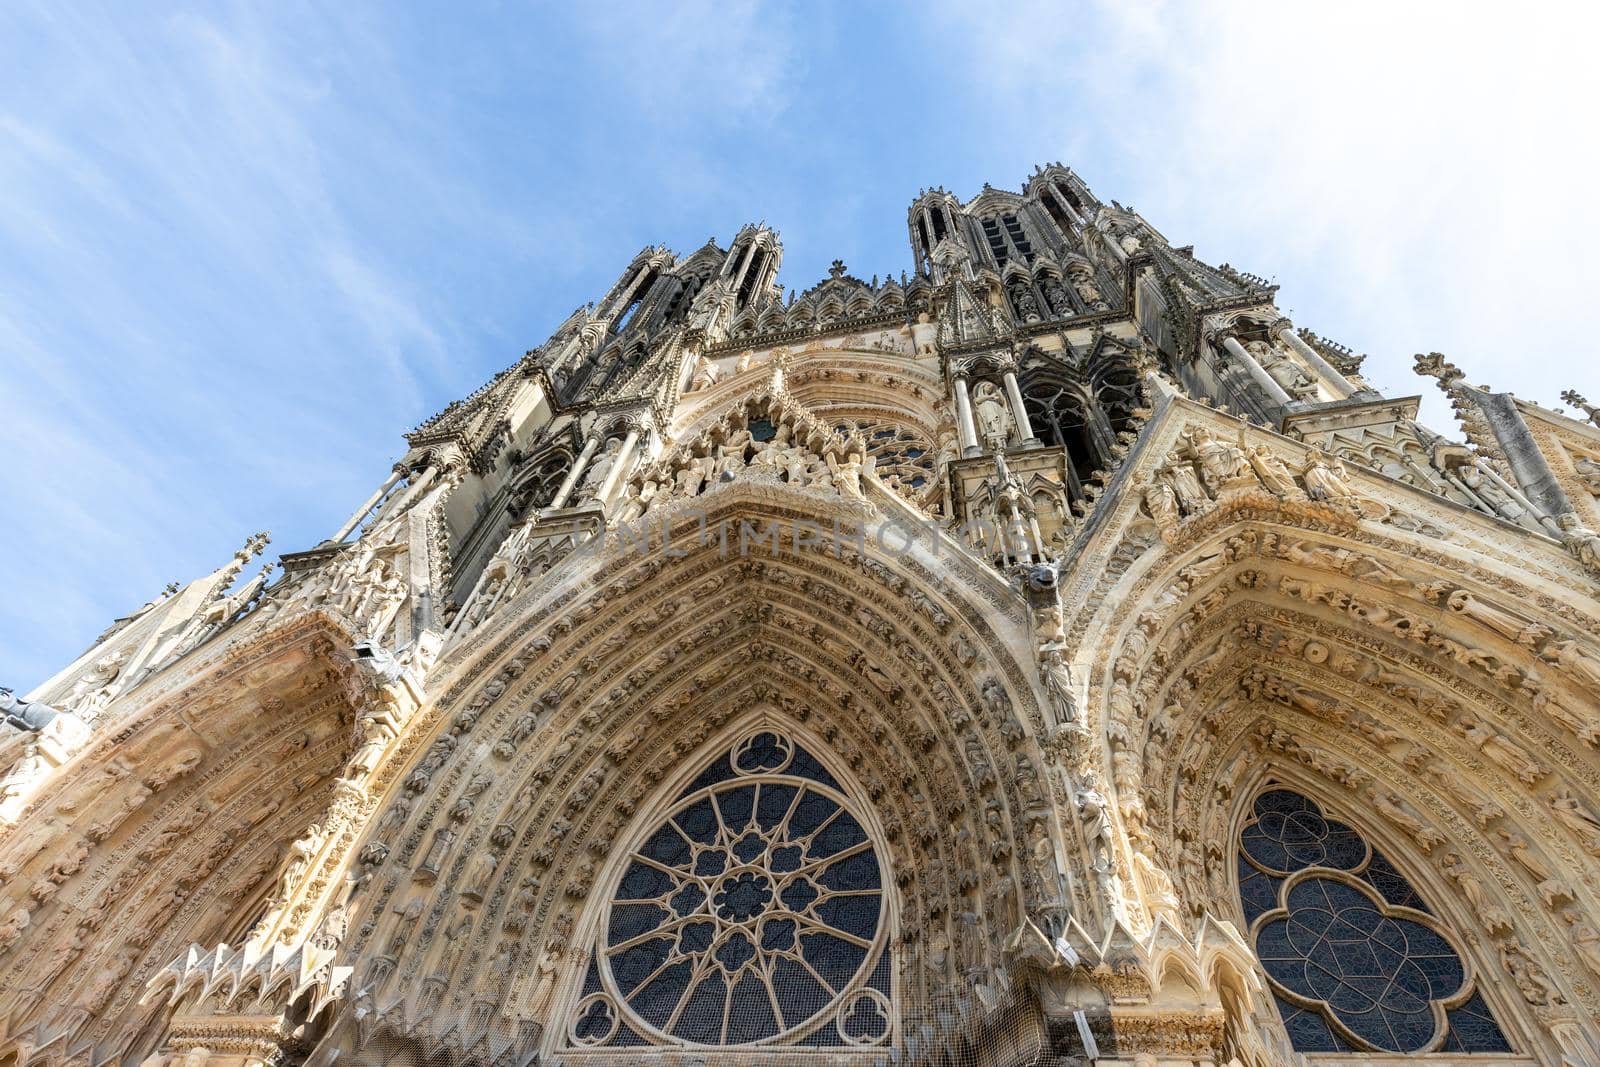 Low angle view at the front of cathedral Notre Dame in Reims, France